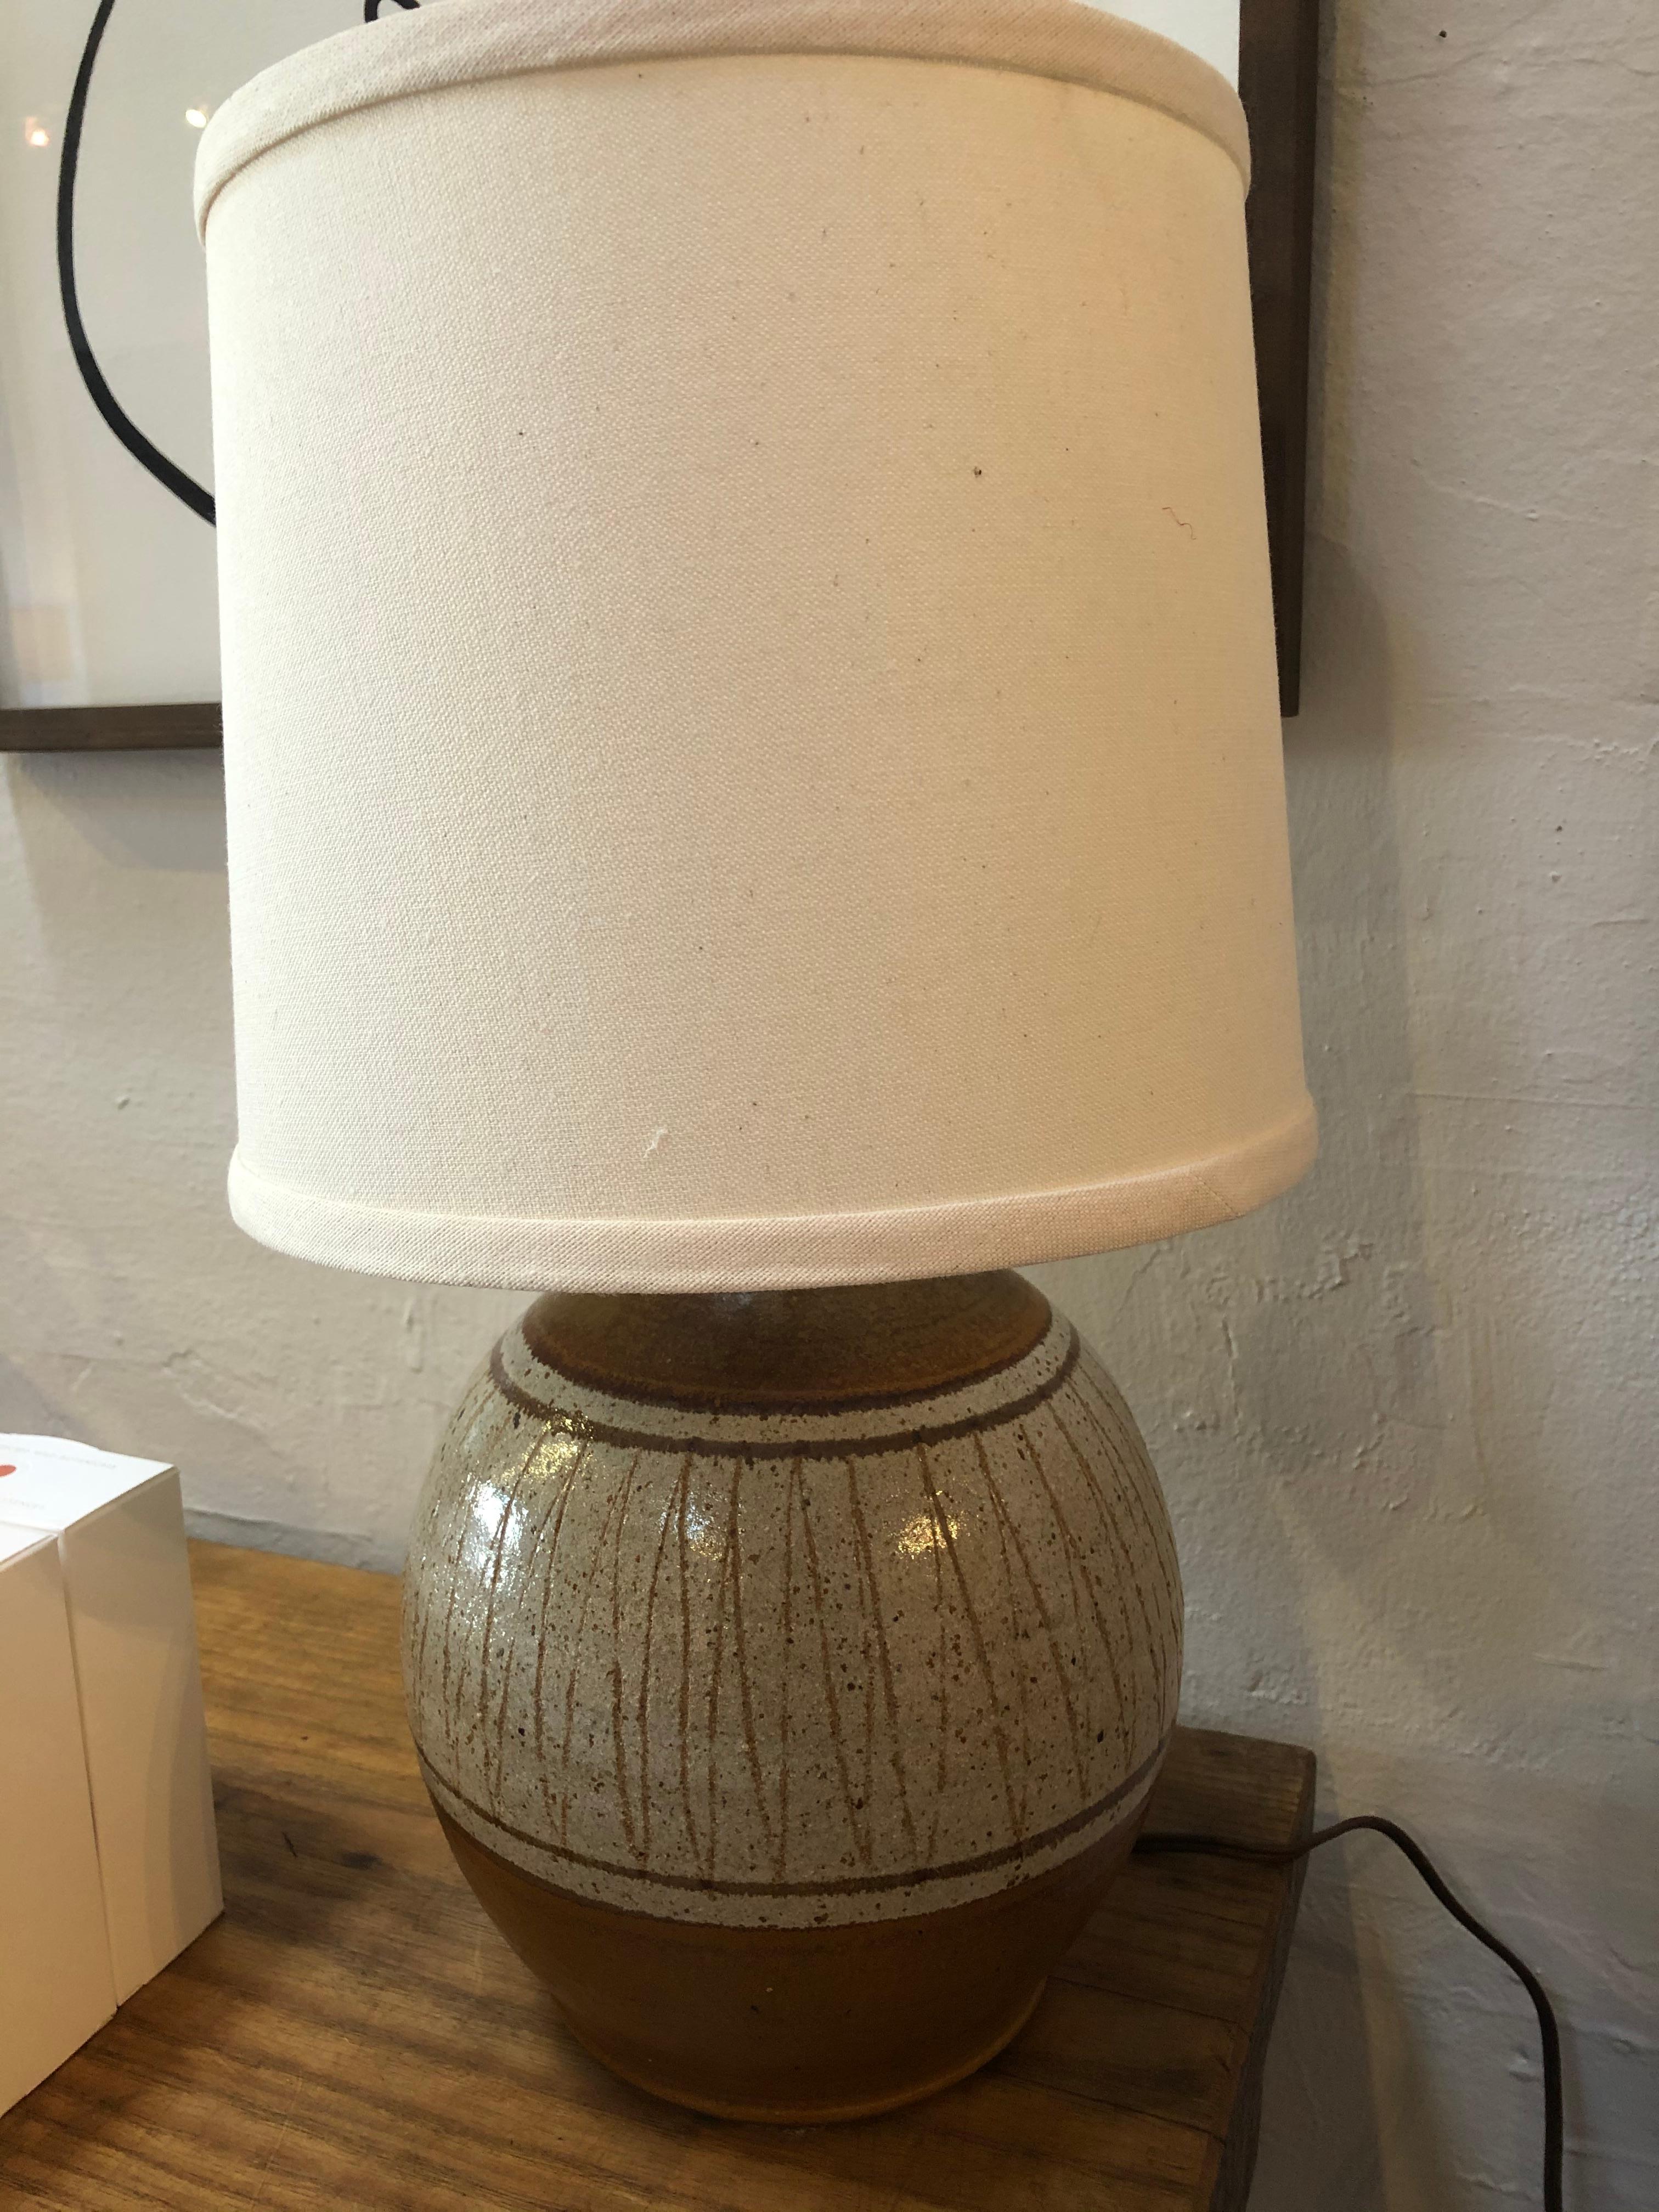 Midcentury ceramic Lamp with linen shade is a great size for end tables, desks, kitchens, offices and so much more. Base is ceramic camel colored glaze with zig zag design around. Cord is 6'8